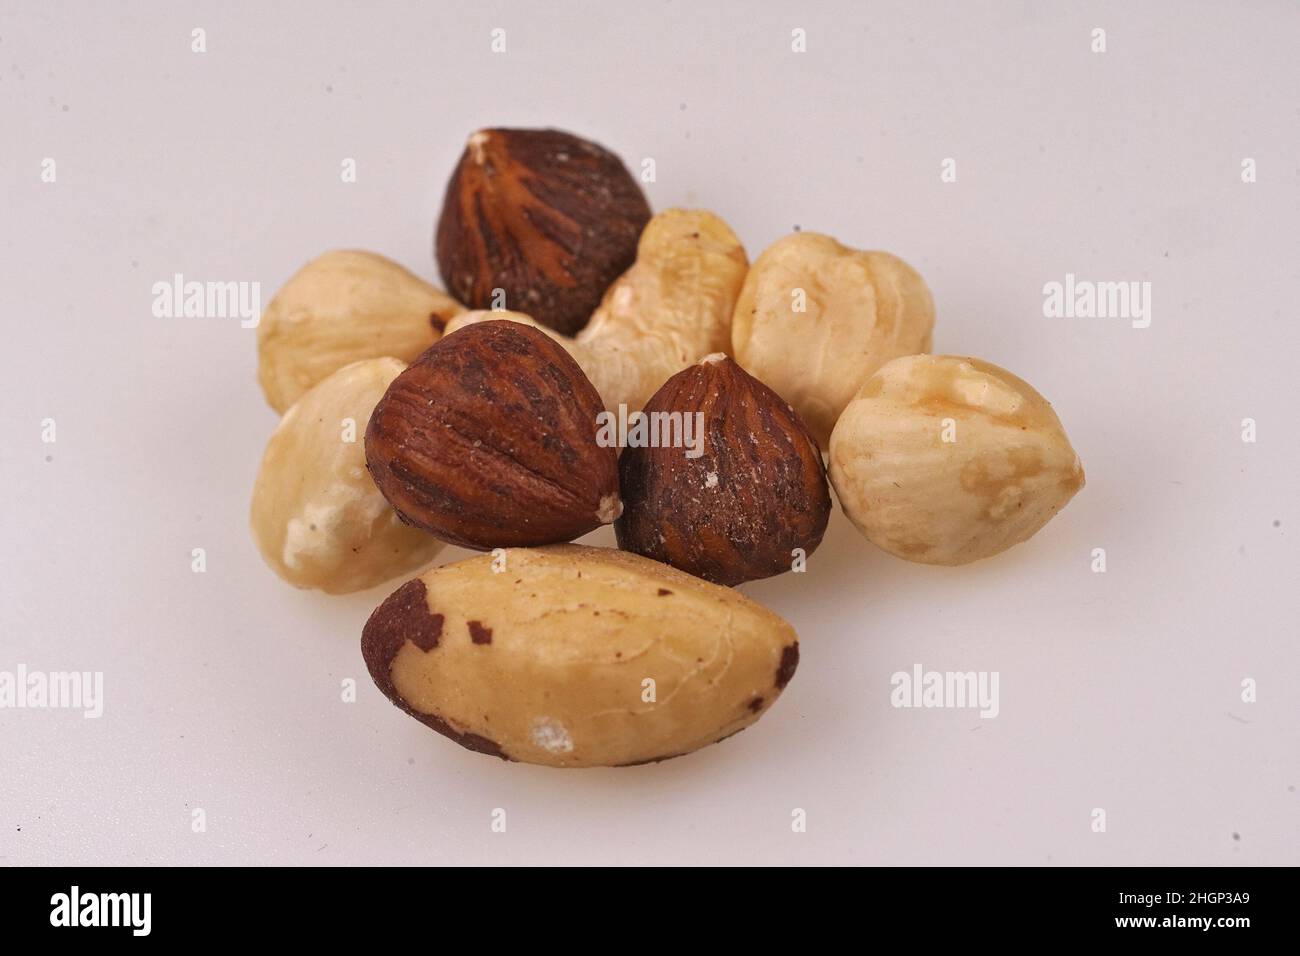 Closeup on natural healthy protein nourishment , an aggregation of various nuts on white background Stock Photo